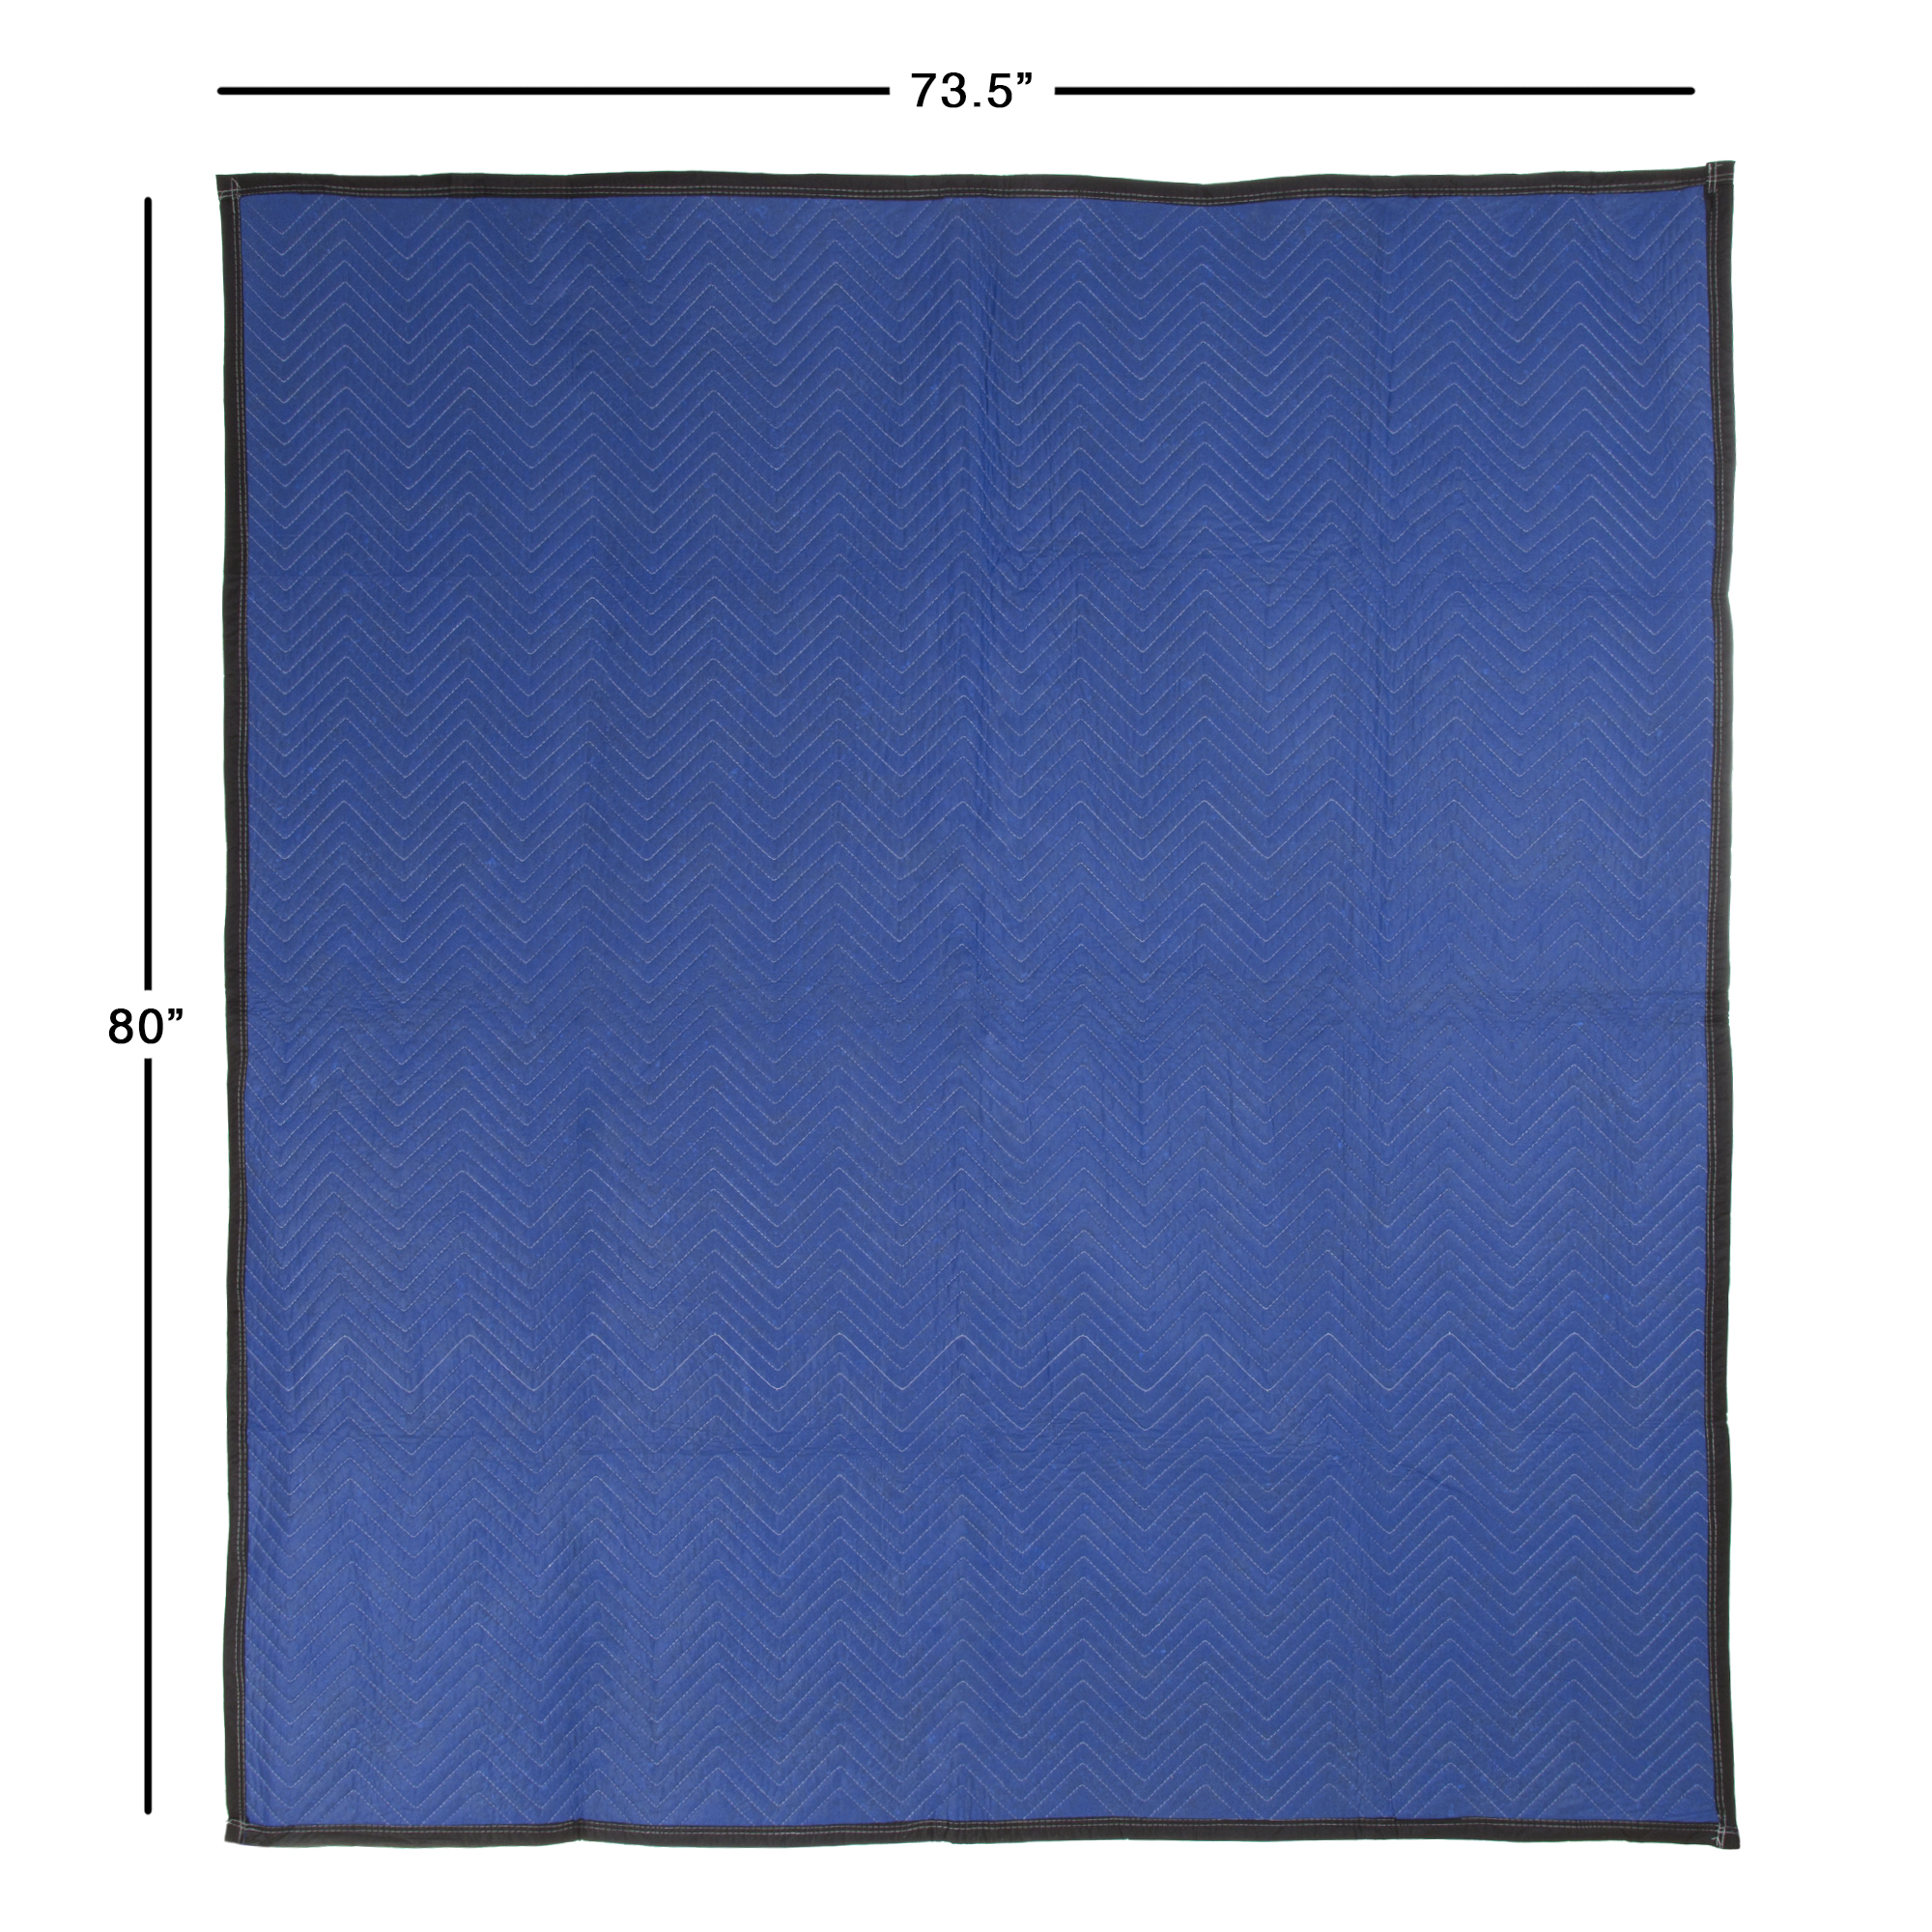 STALWART Cotton-Filled Moving Blanket – Heavy-Duty Drop Cloth to Cover Furniture, Appliances and Cushion Moving Boxes – Blue, 73.5" x 80", Set of 1 - image 2 of 5